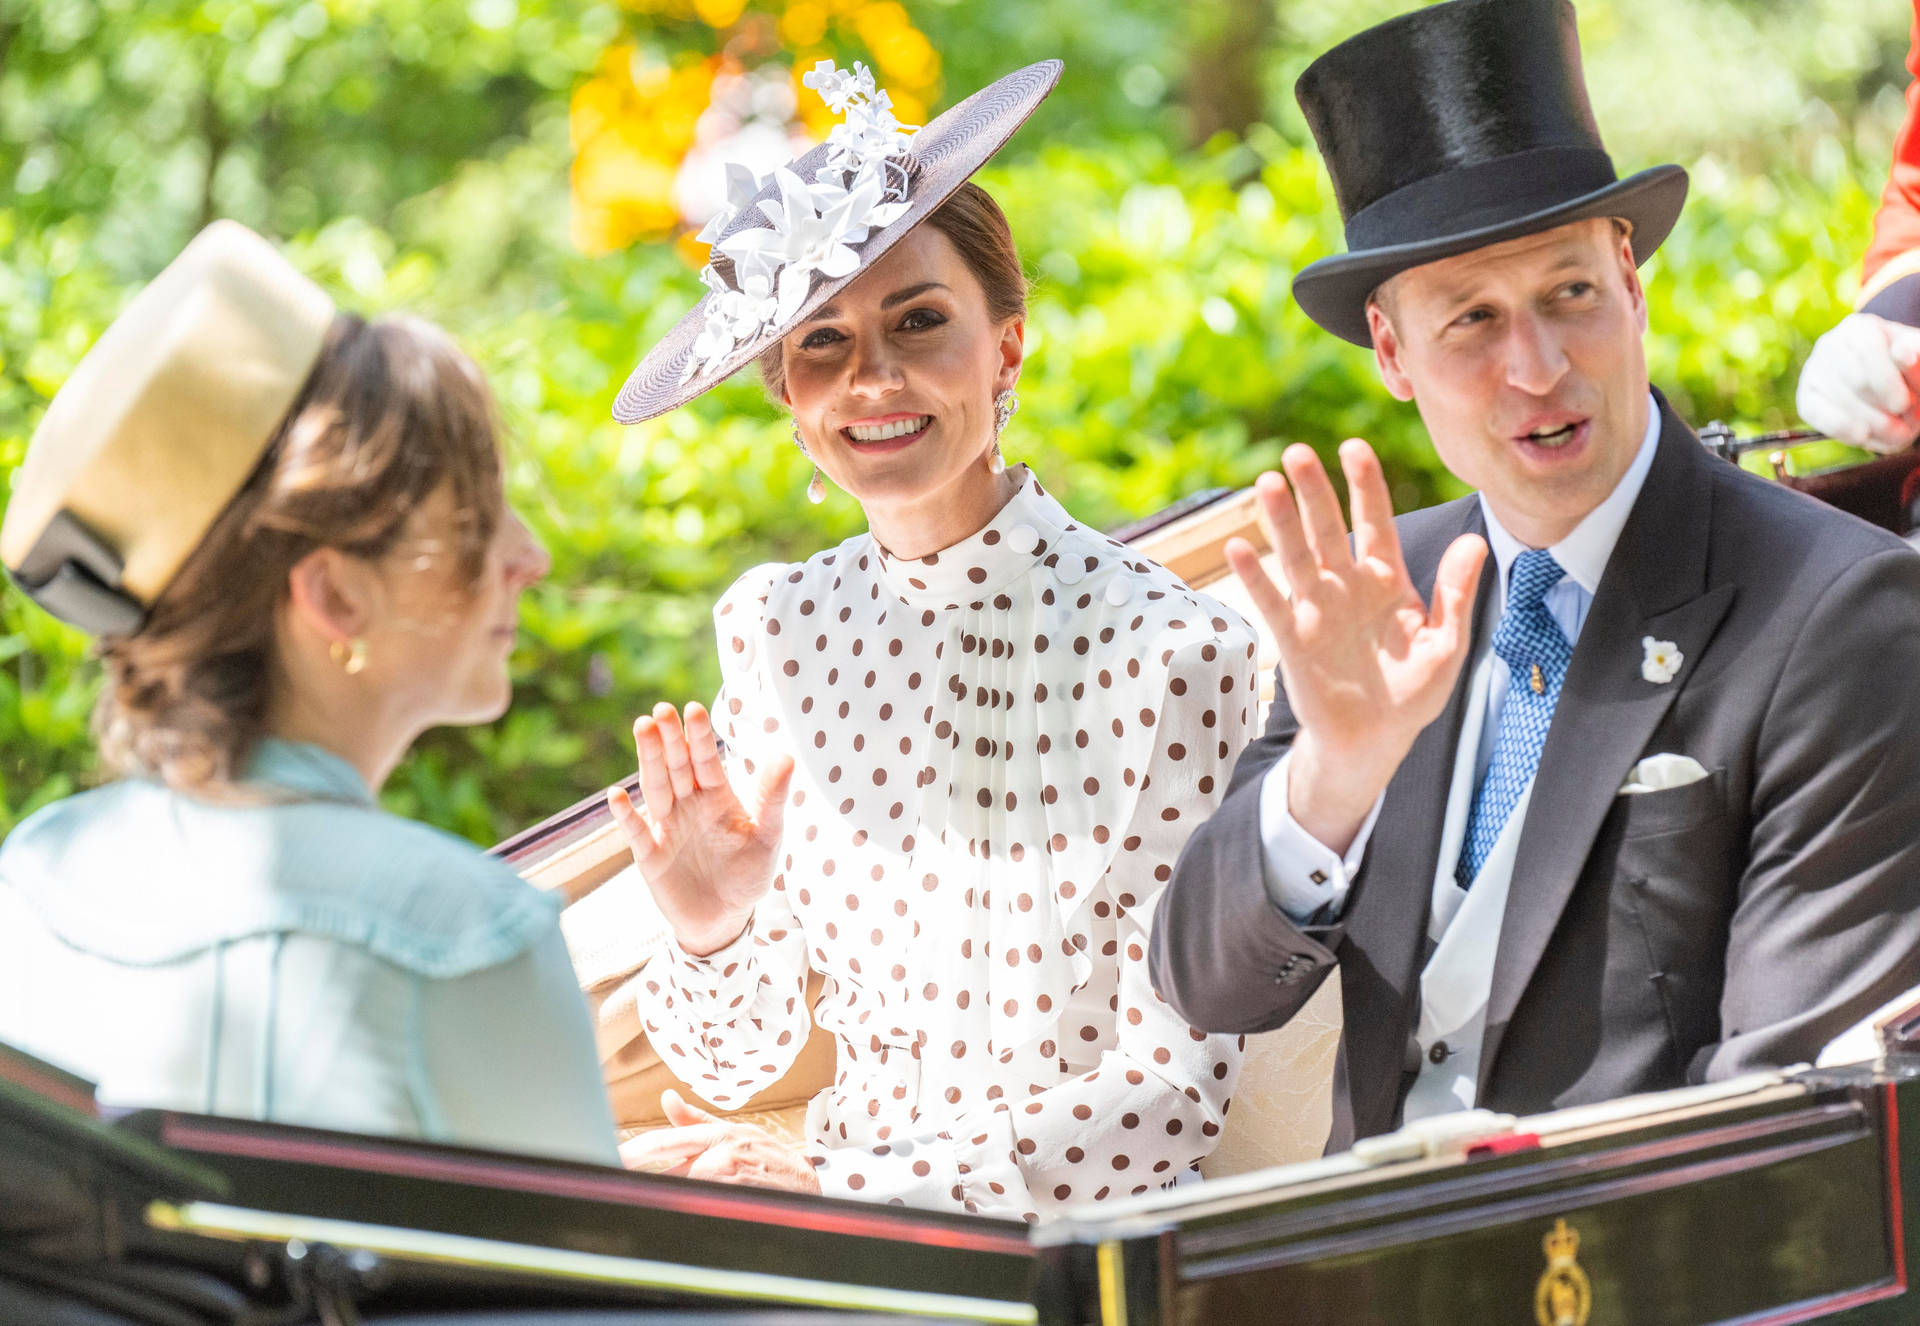 Prince William And Kate Wearing Hats